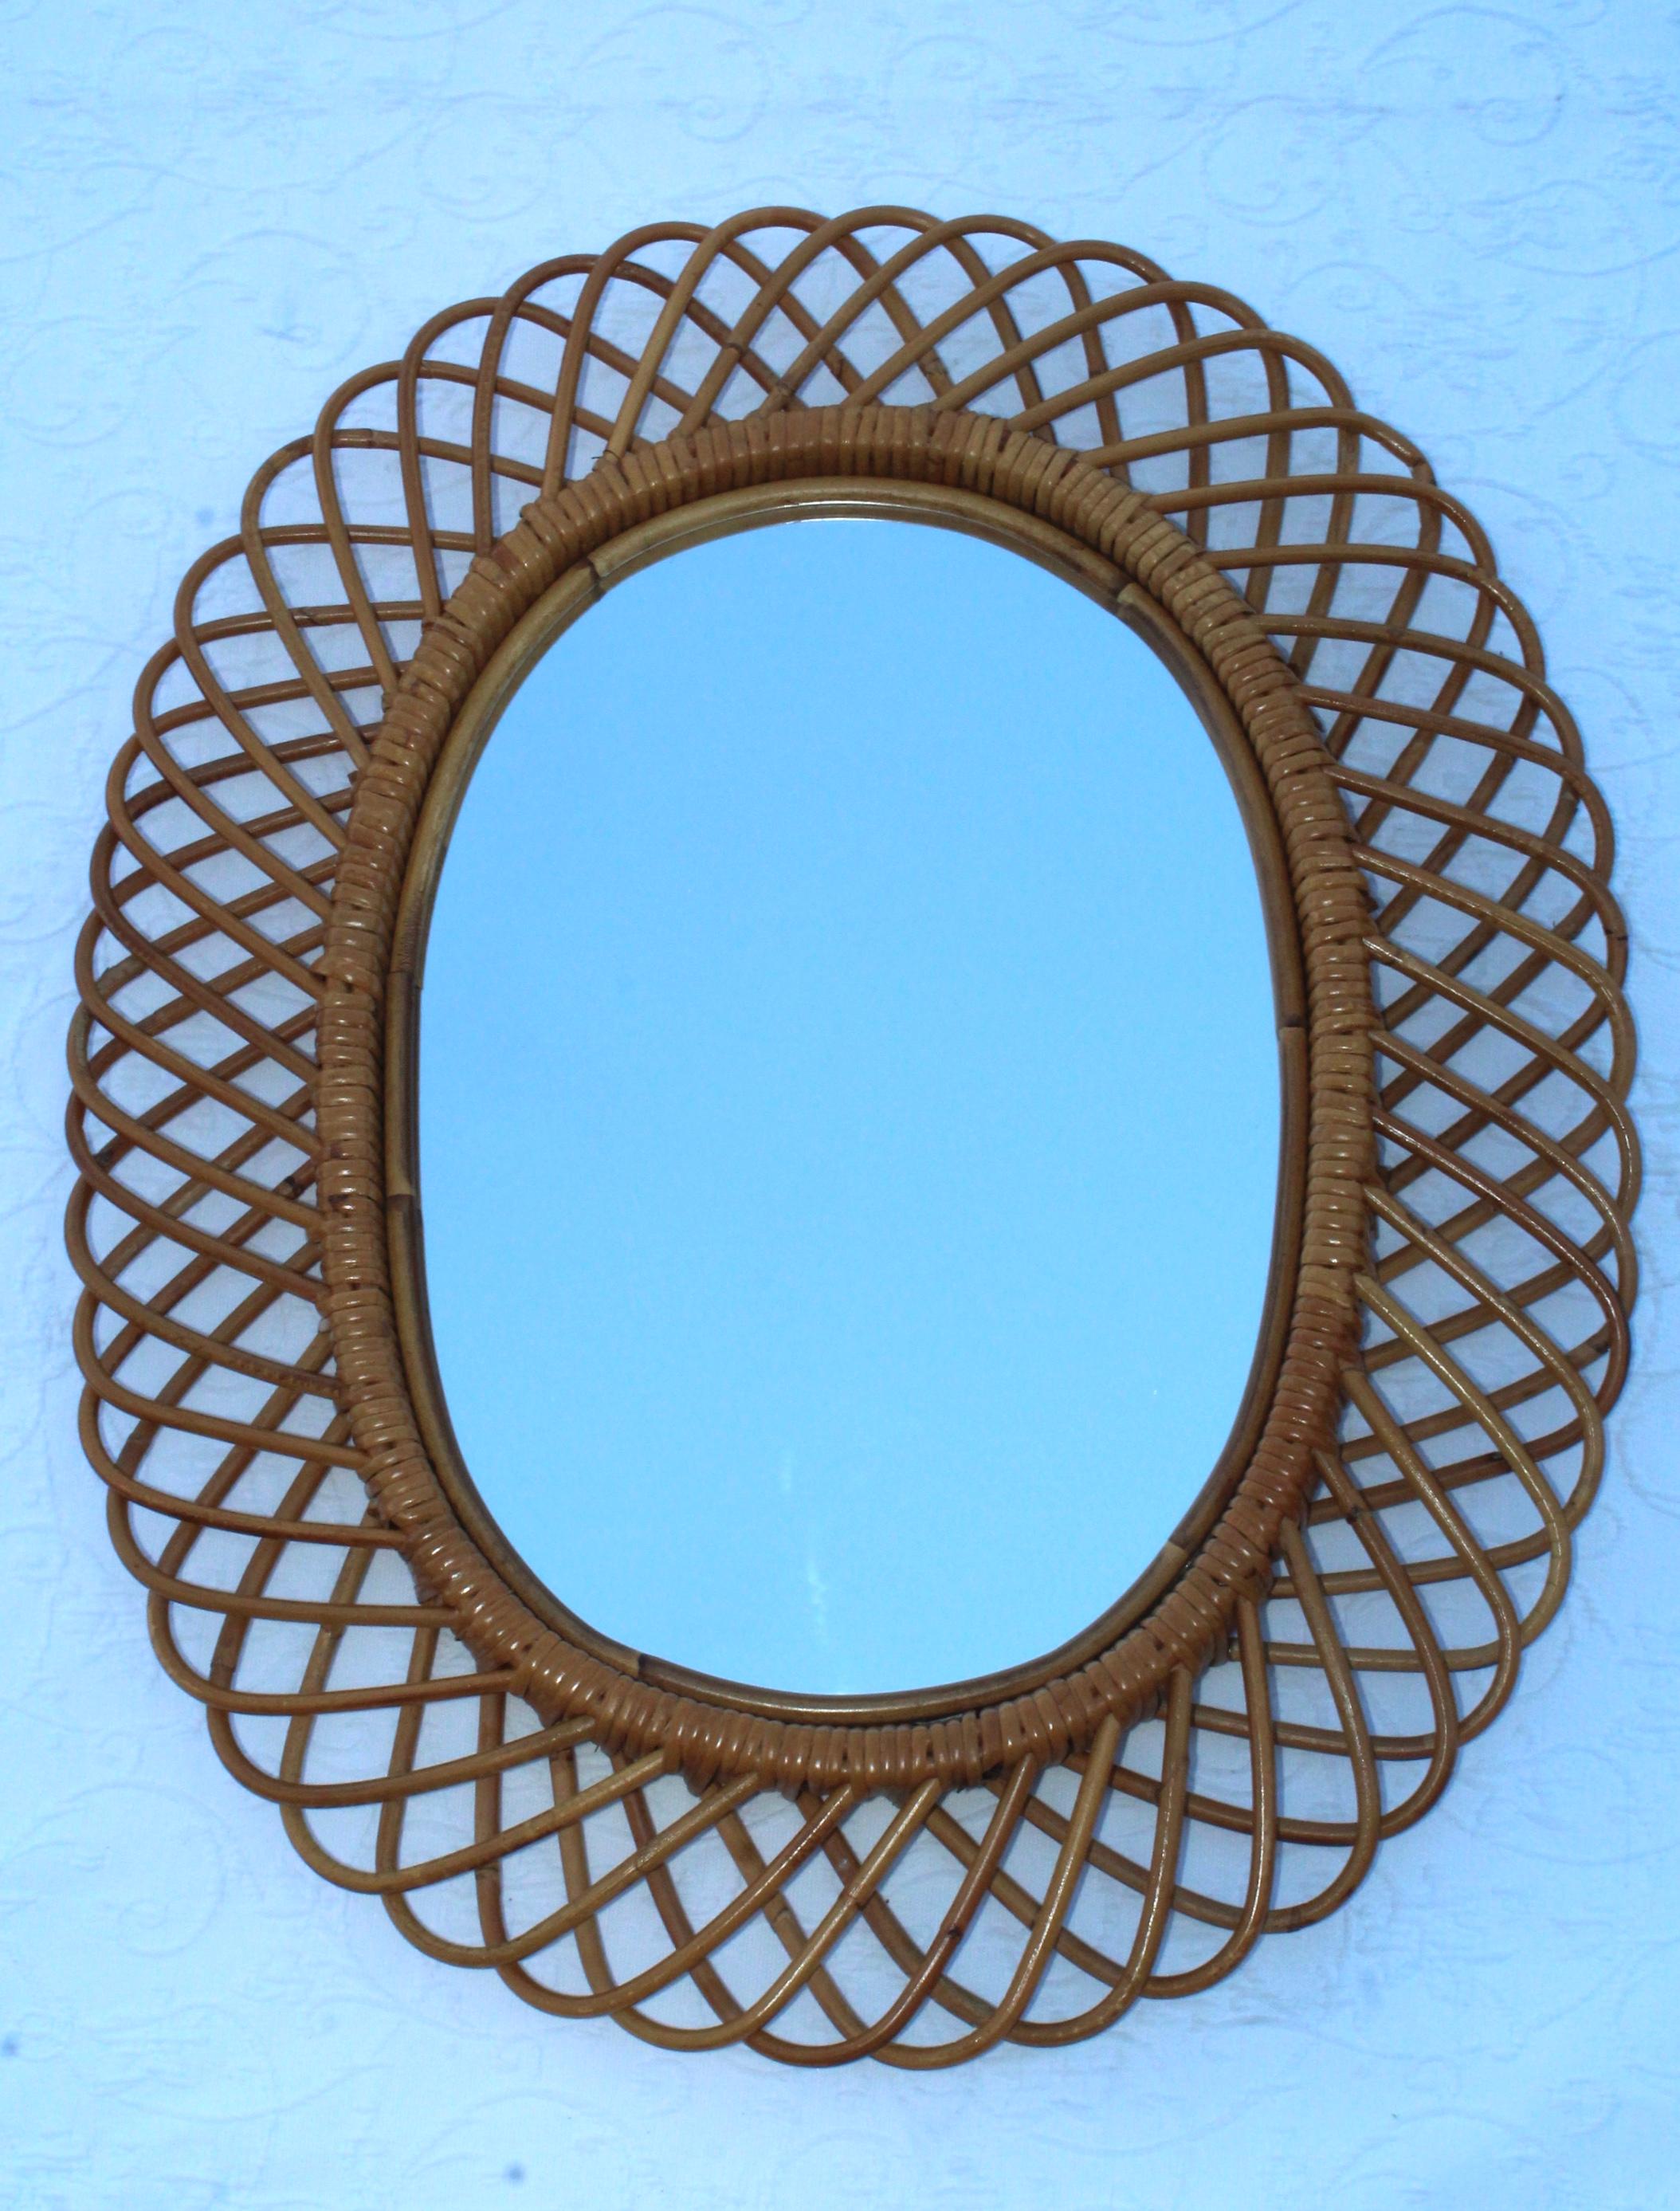 1960s Mid-Century Modern rattan and bamboo oval wall mirror designed by Franco Albini.